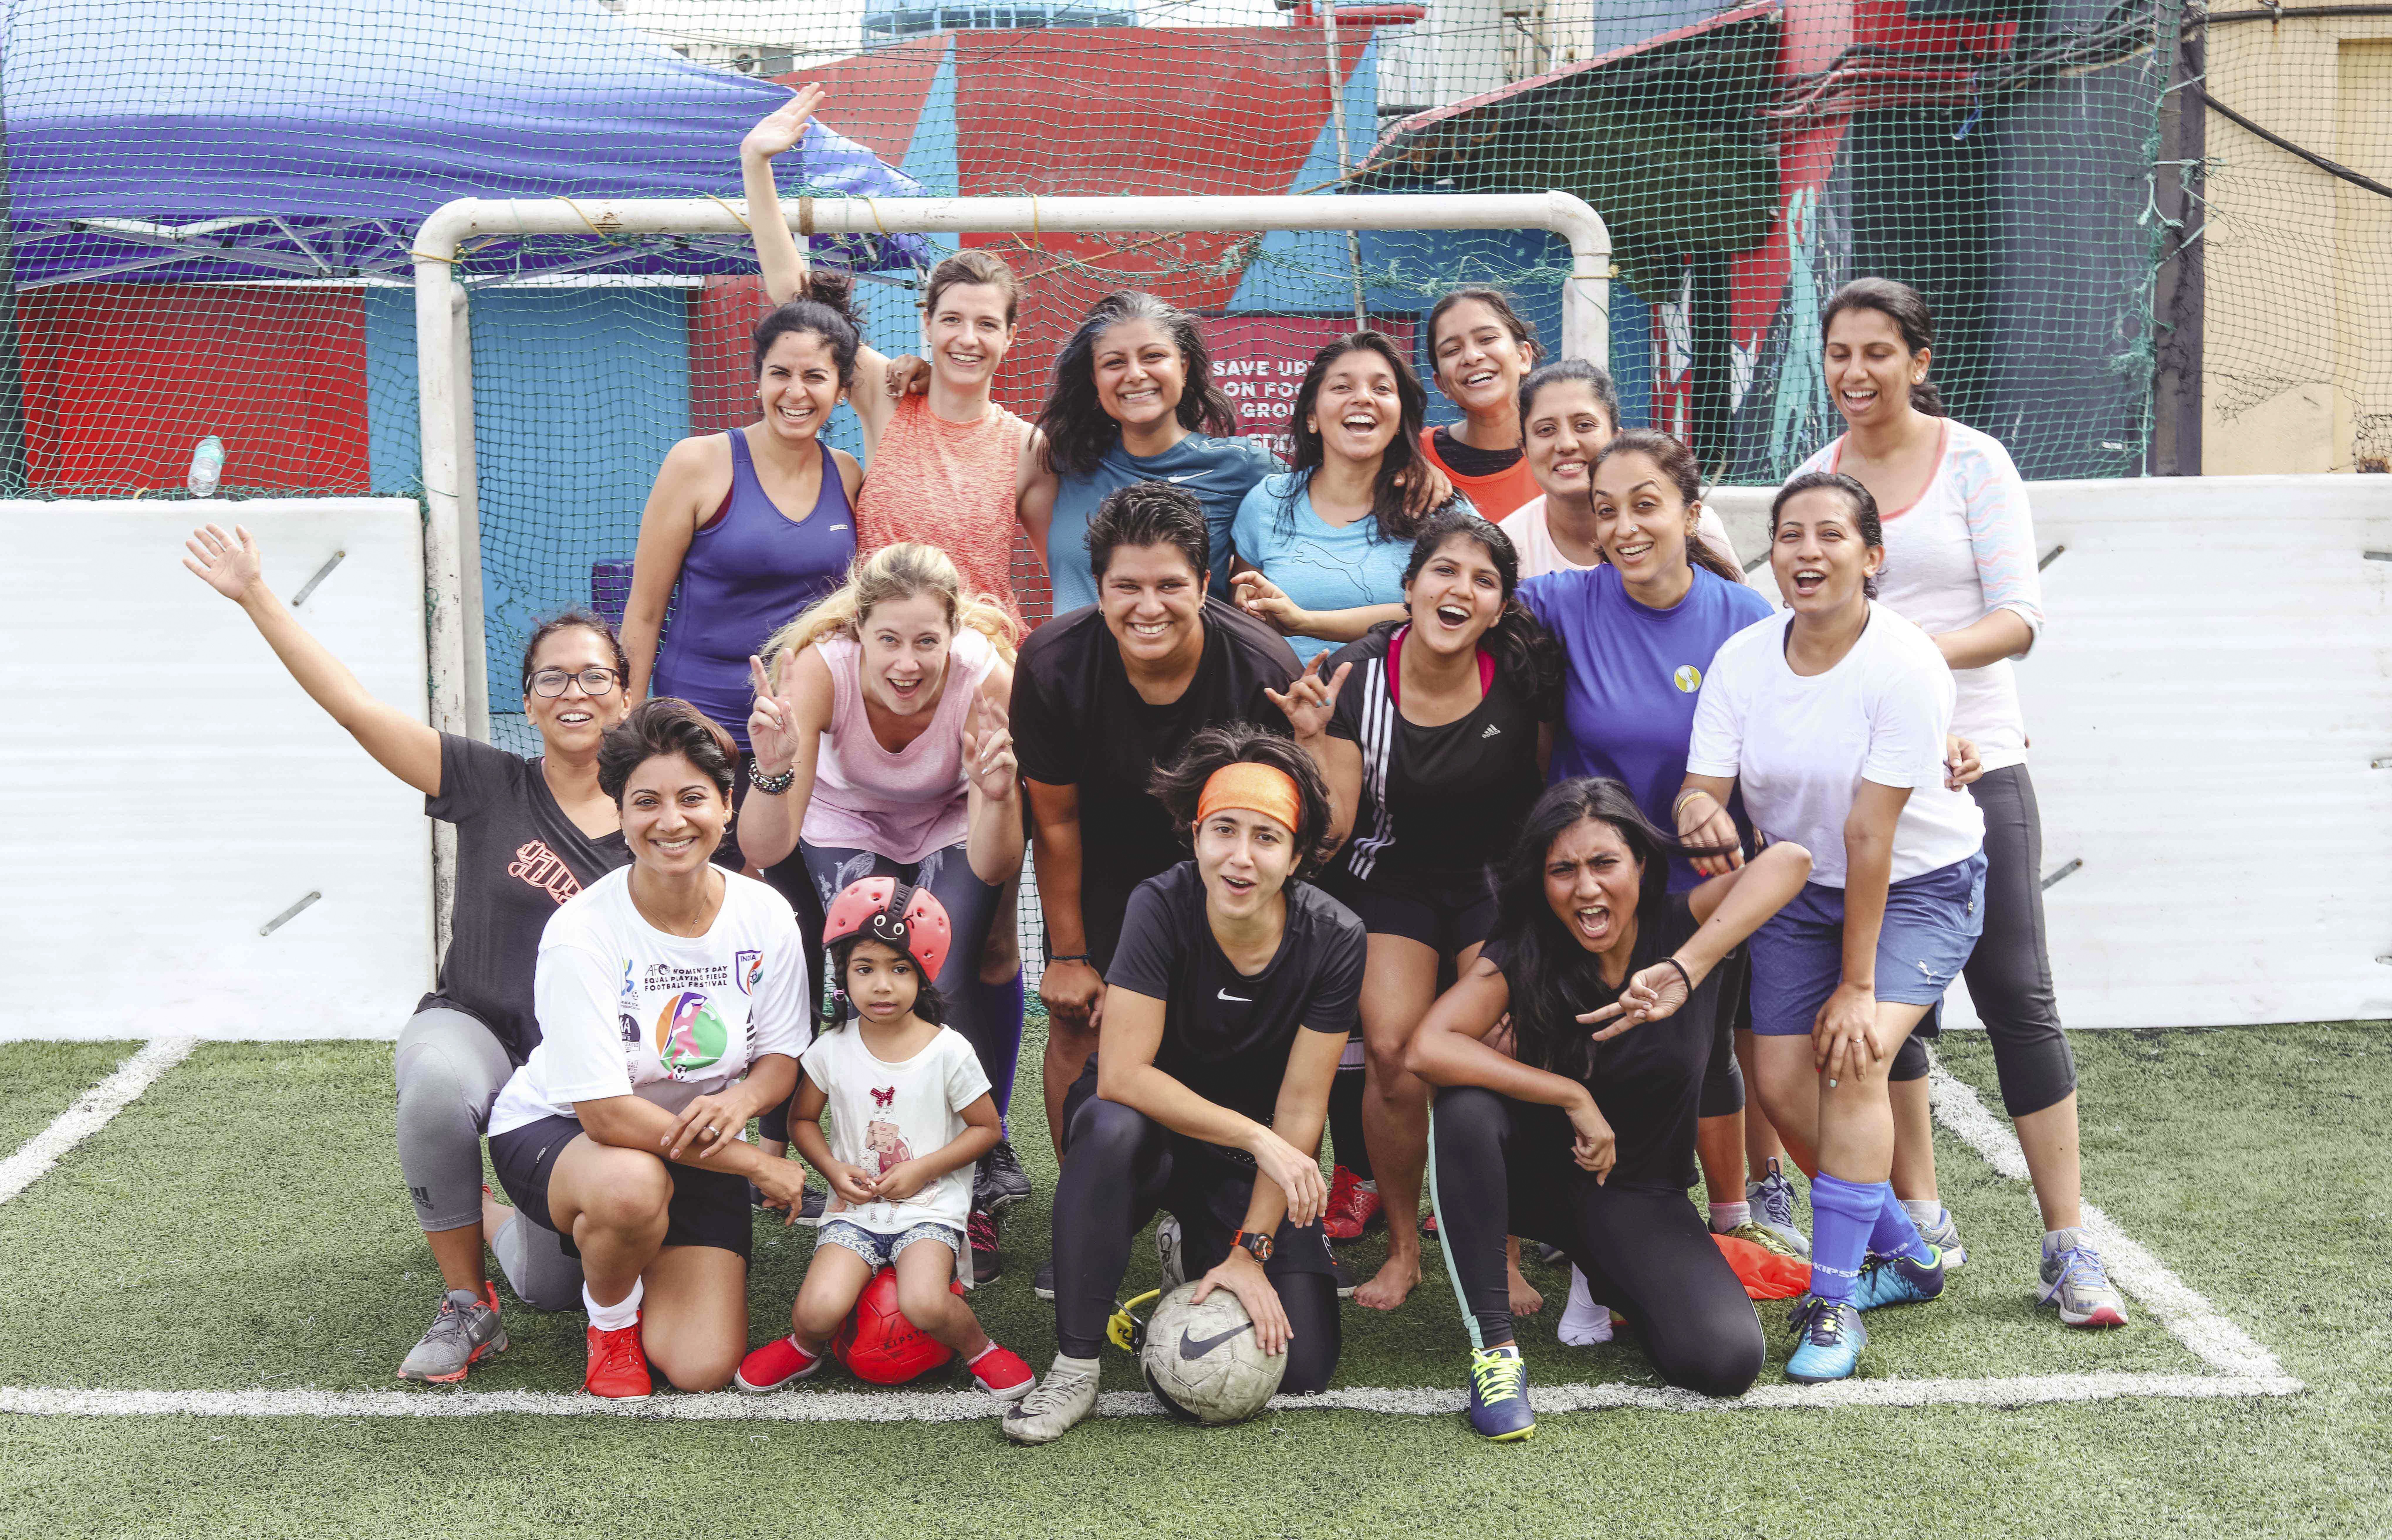 Sisters in Sweat is a female soccer community aimed at empowering women. Photo: Vishal Dey